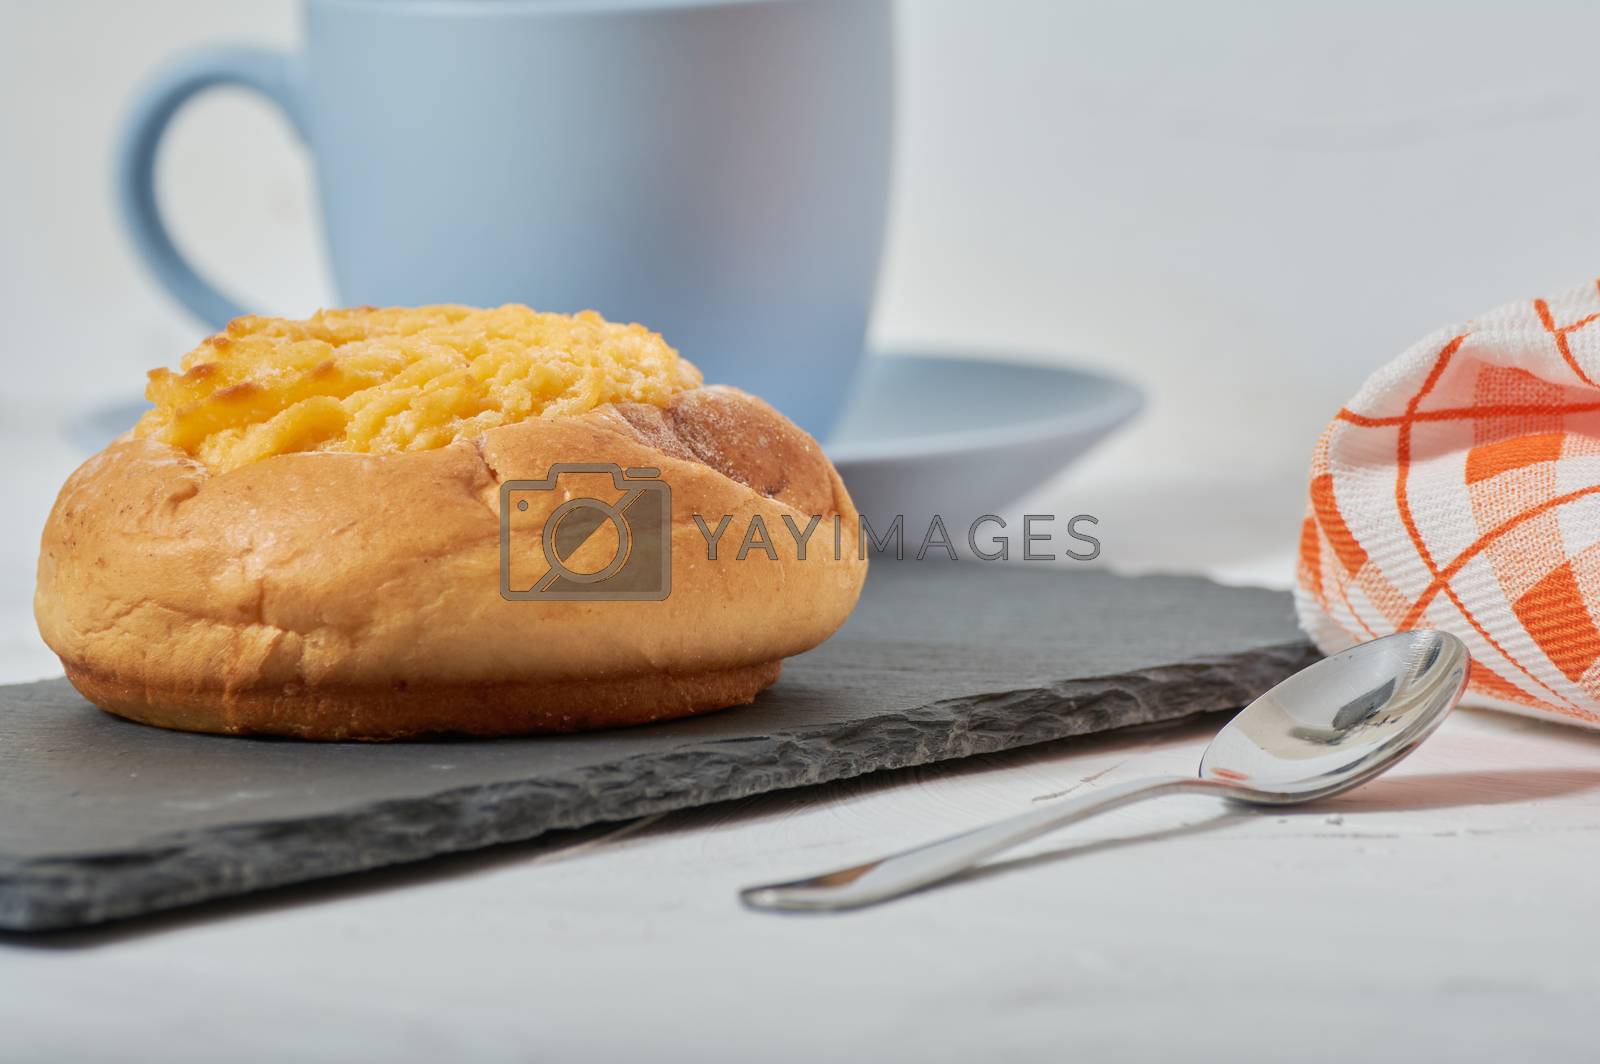 Royalty free image of coconut cream bun by Prf_photo